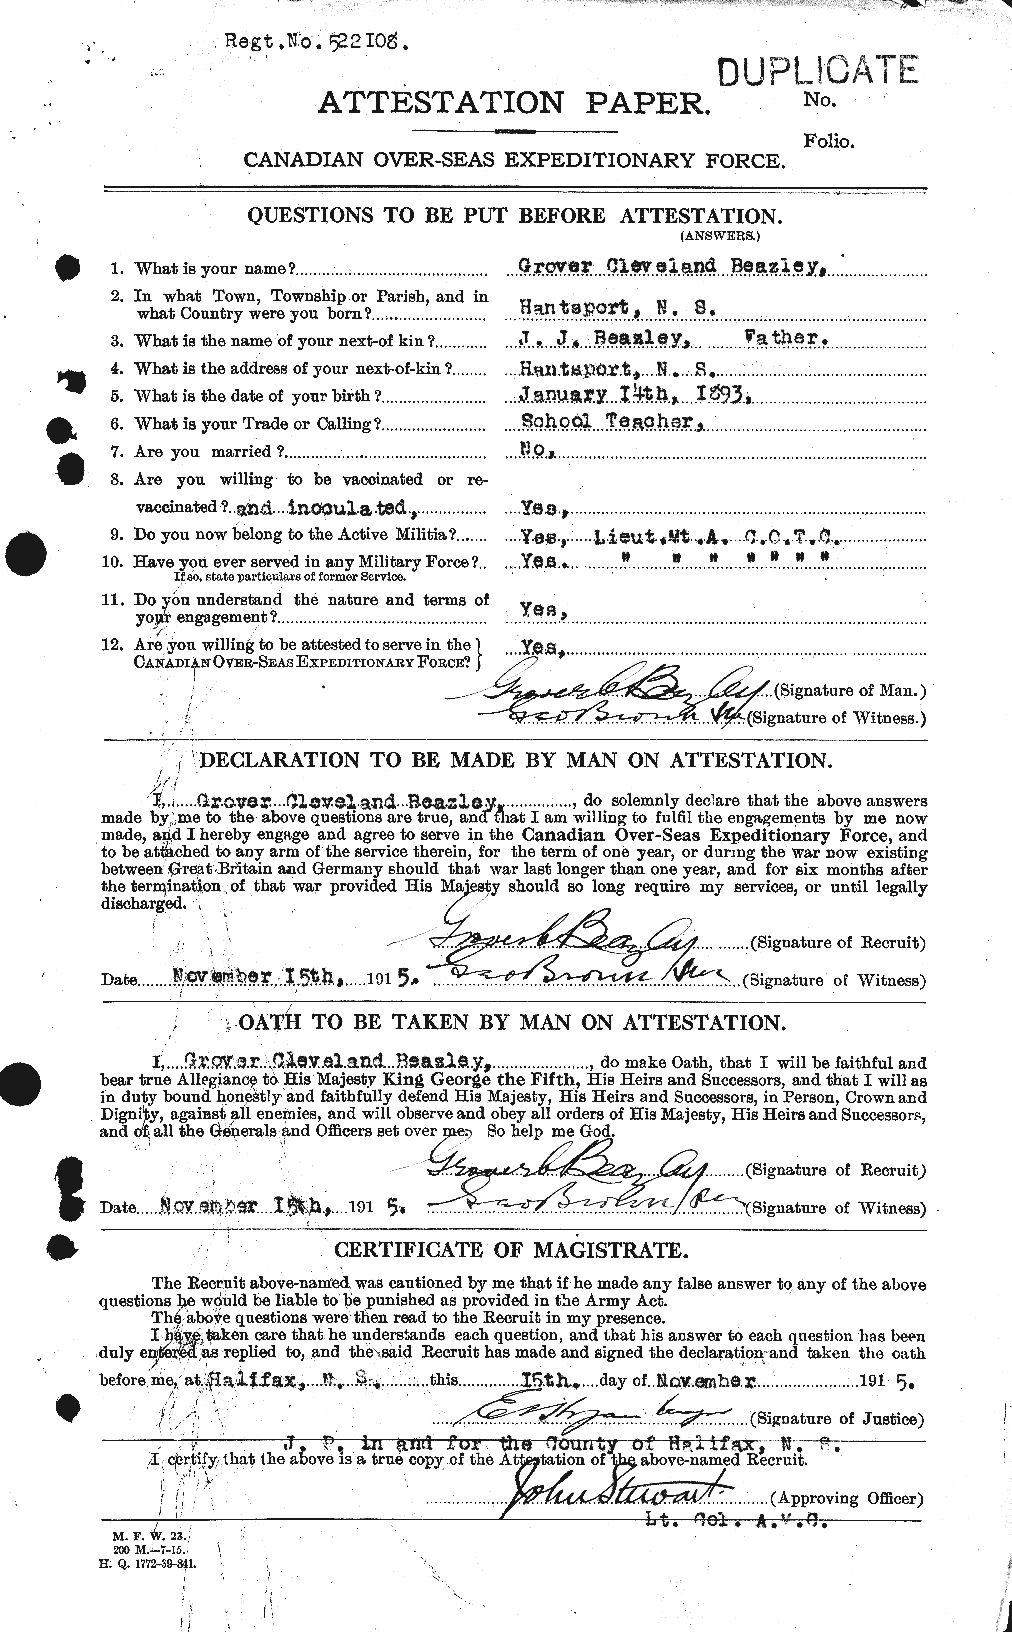 Personnel Records of the First World War - CEF 231991a